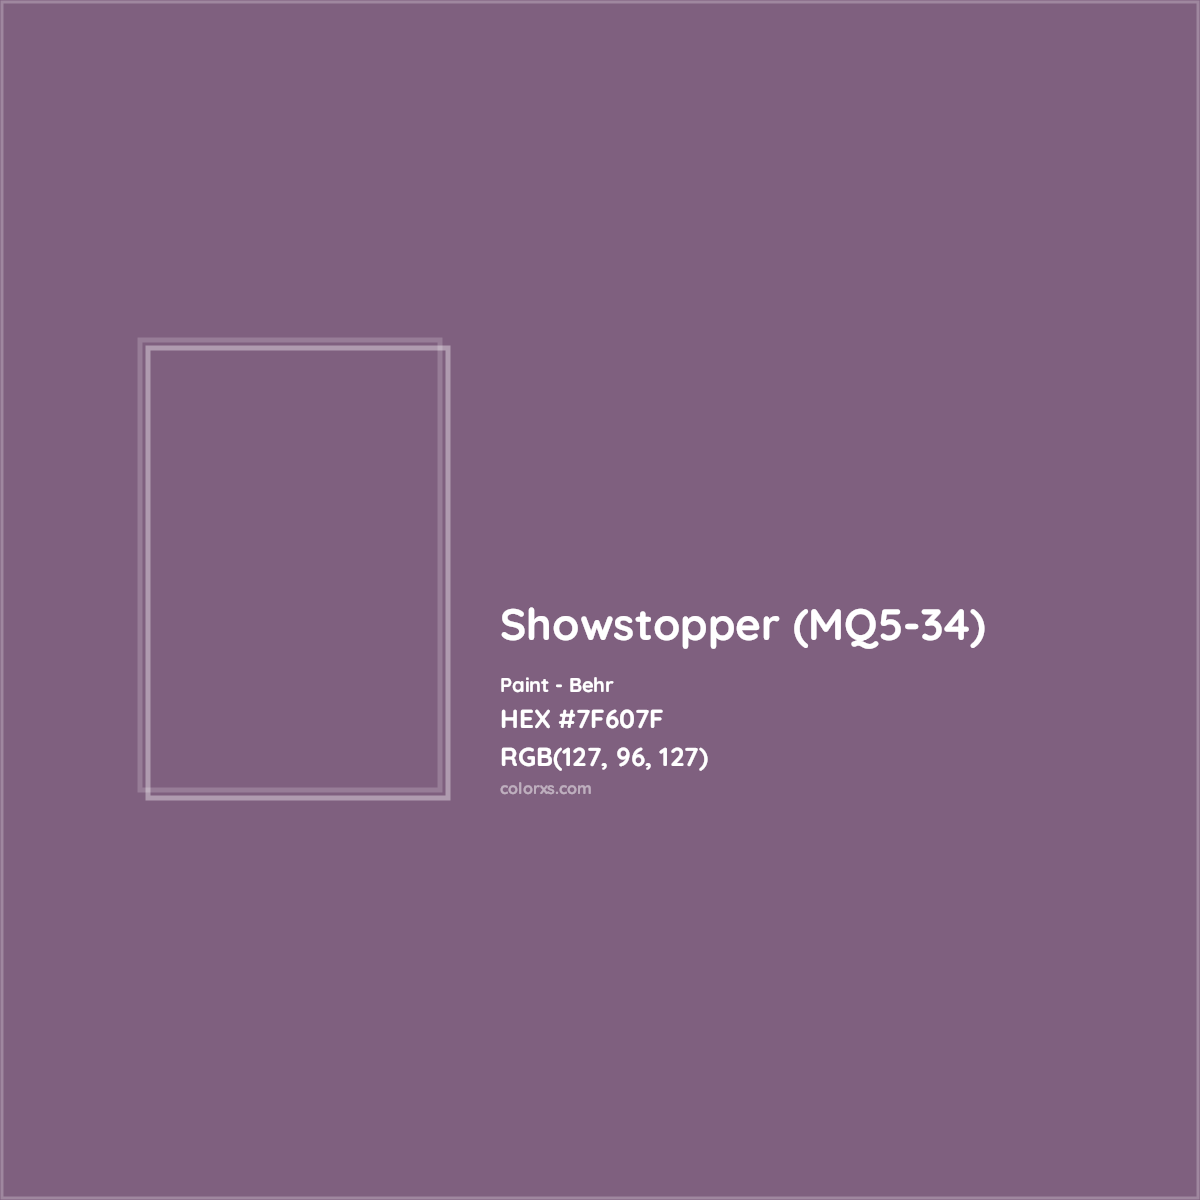 HEX #7F607F Showstopper (MQ5-34) Paint Behr - Color Code